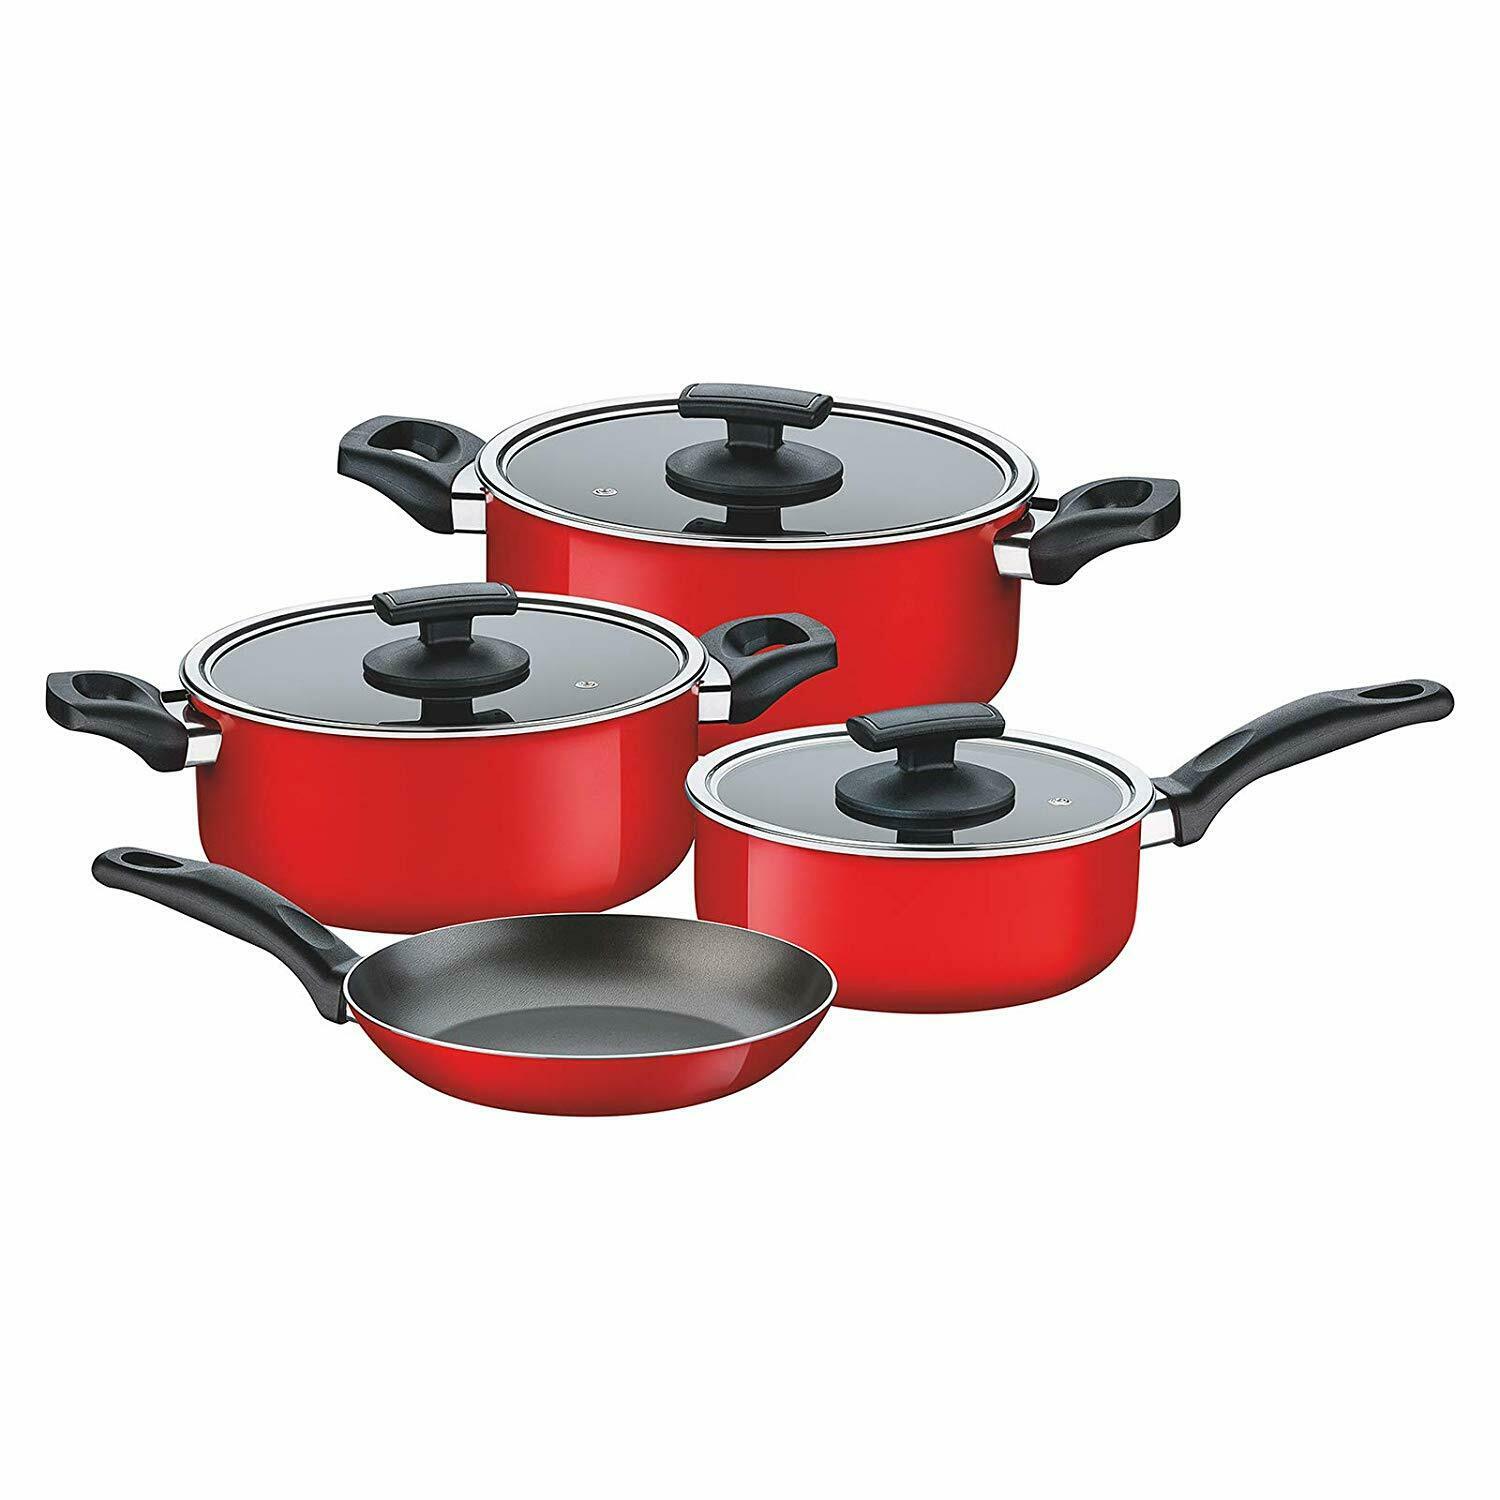 Tramontina Toronto 7 Piece Cookware Set In Red 20499/732